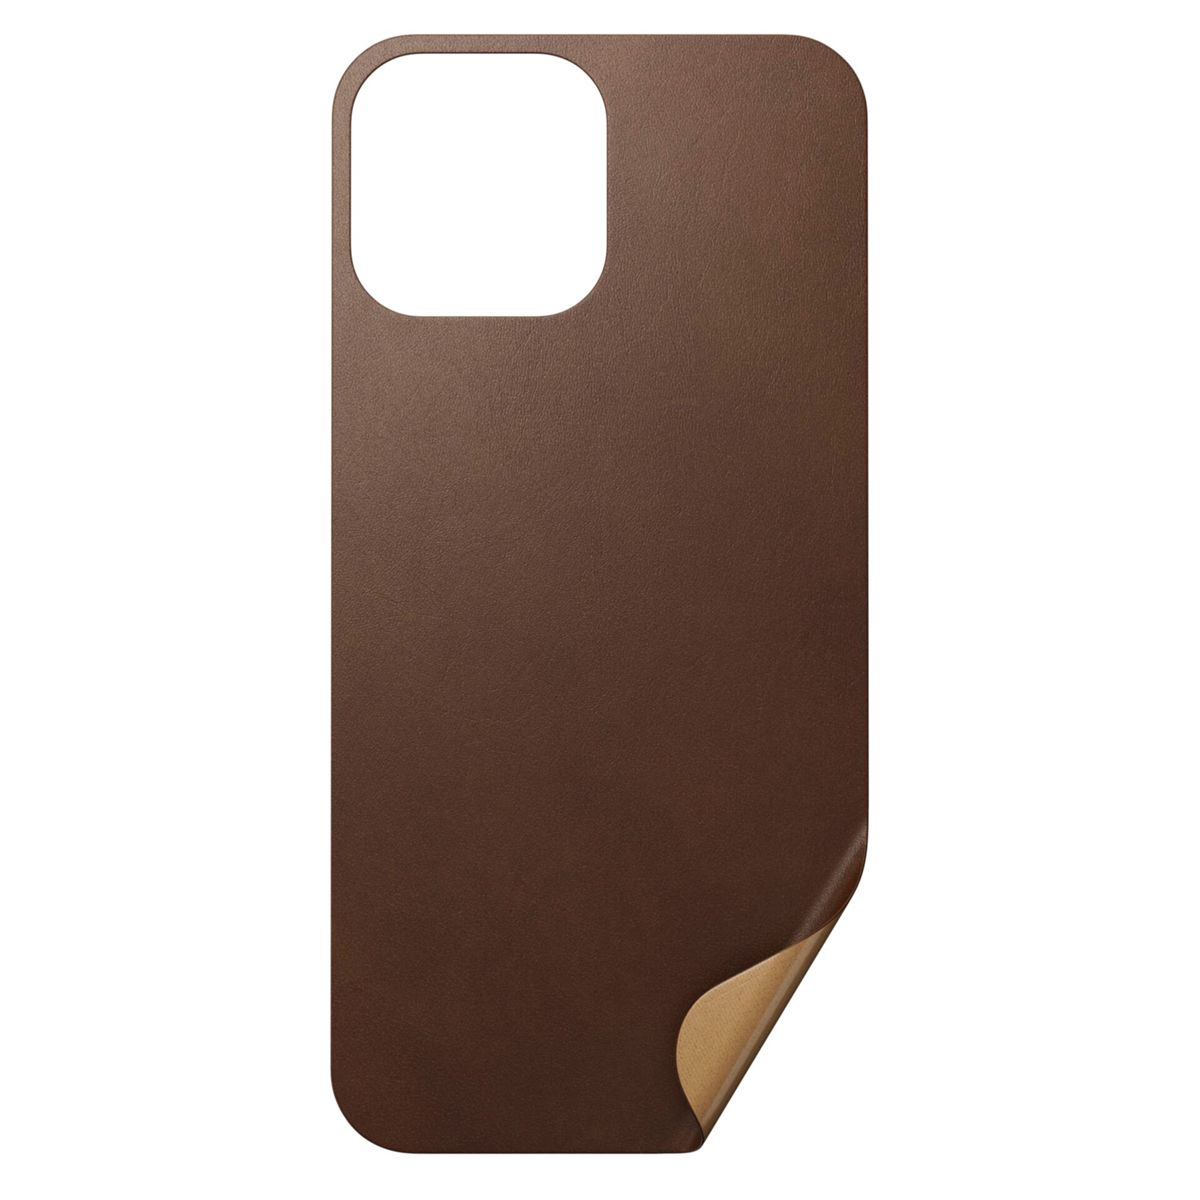 iPhone Rustic Skin braun 13 Max, Apple, Pro Apple, NOMAD Leather Backcover, Brown